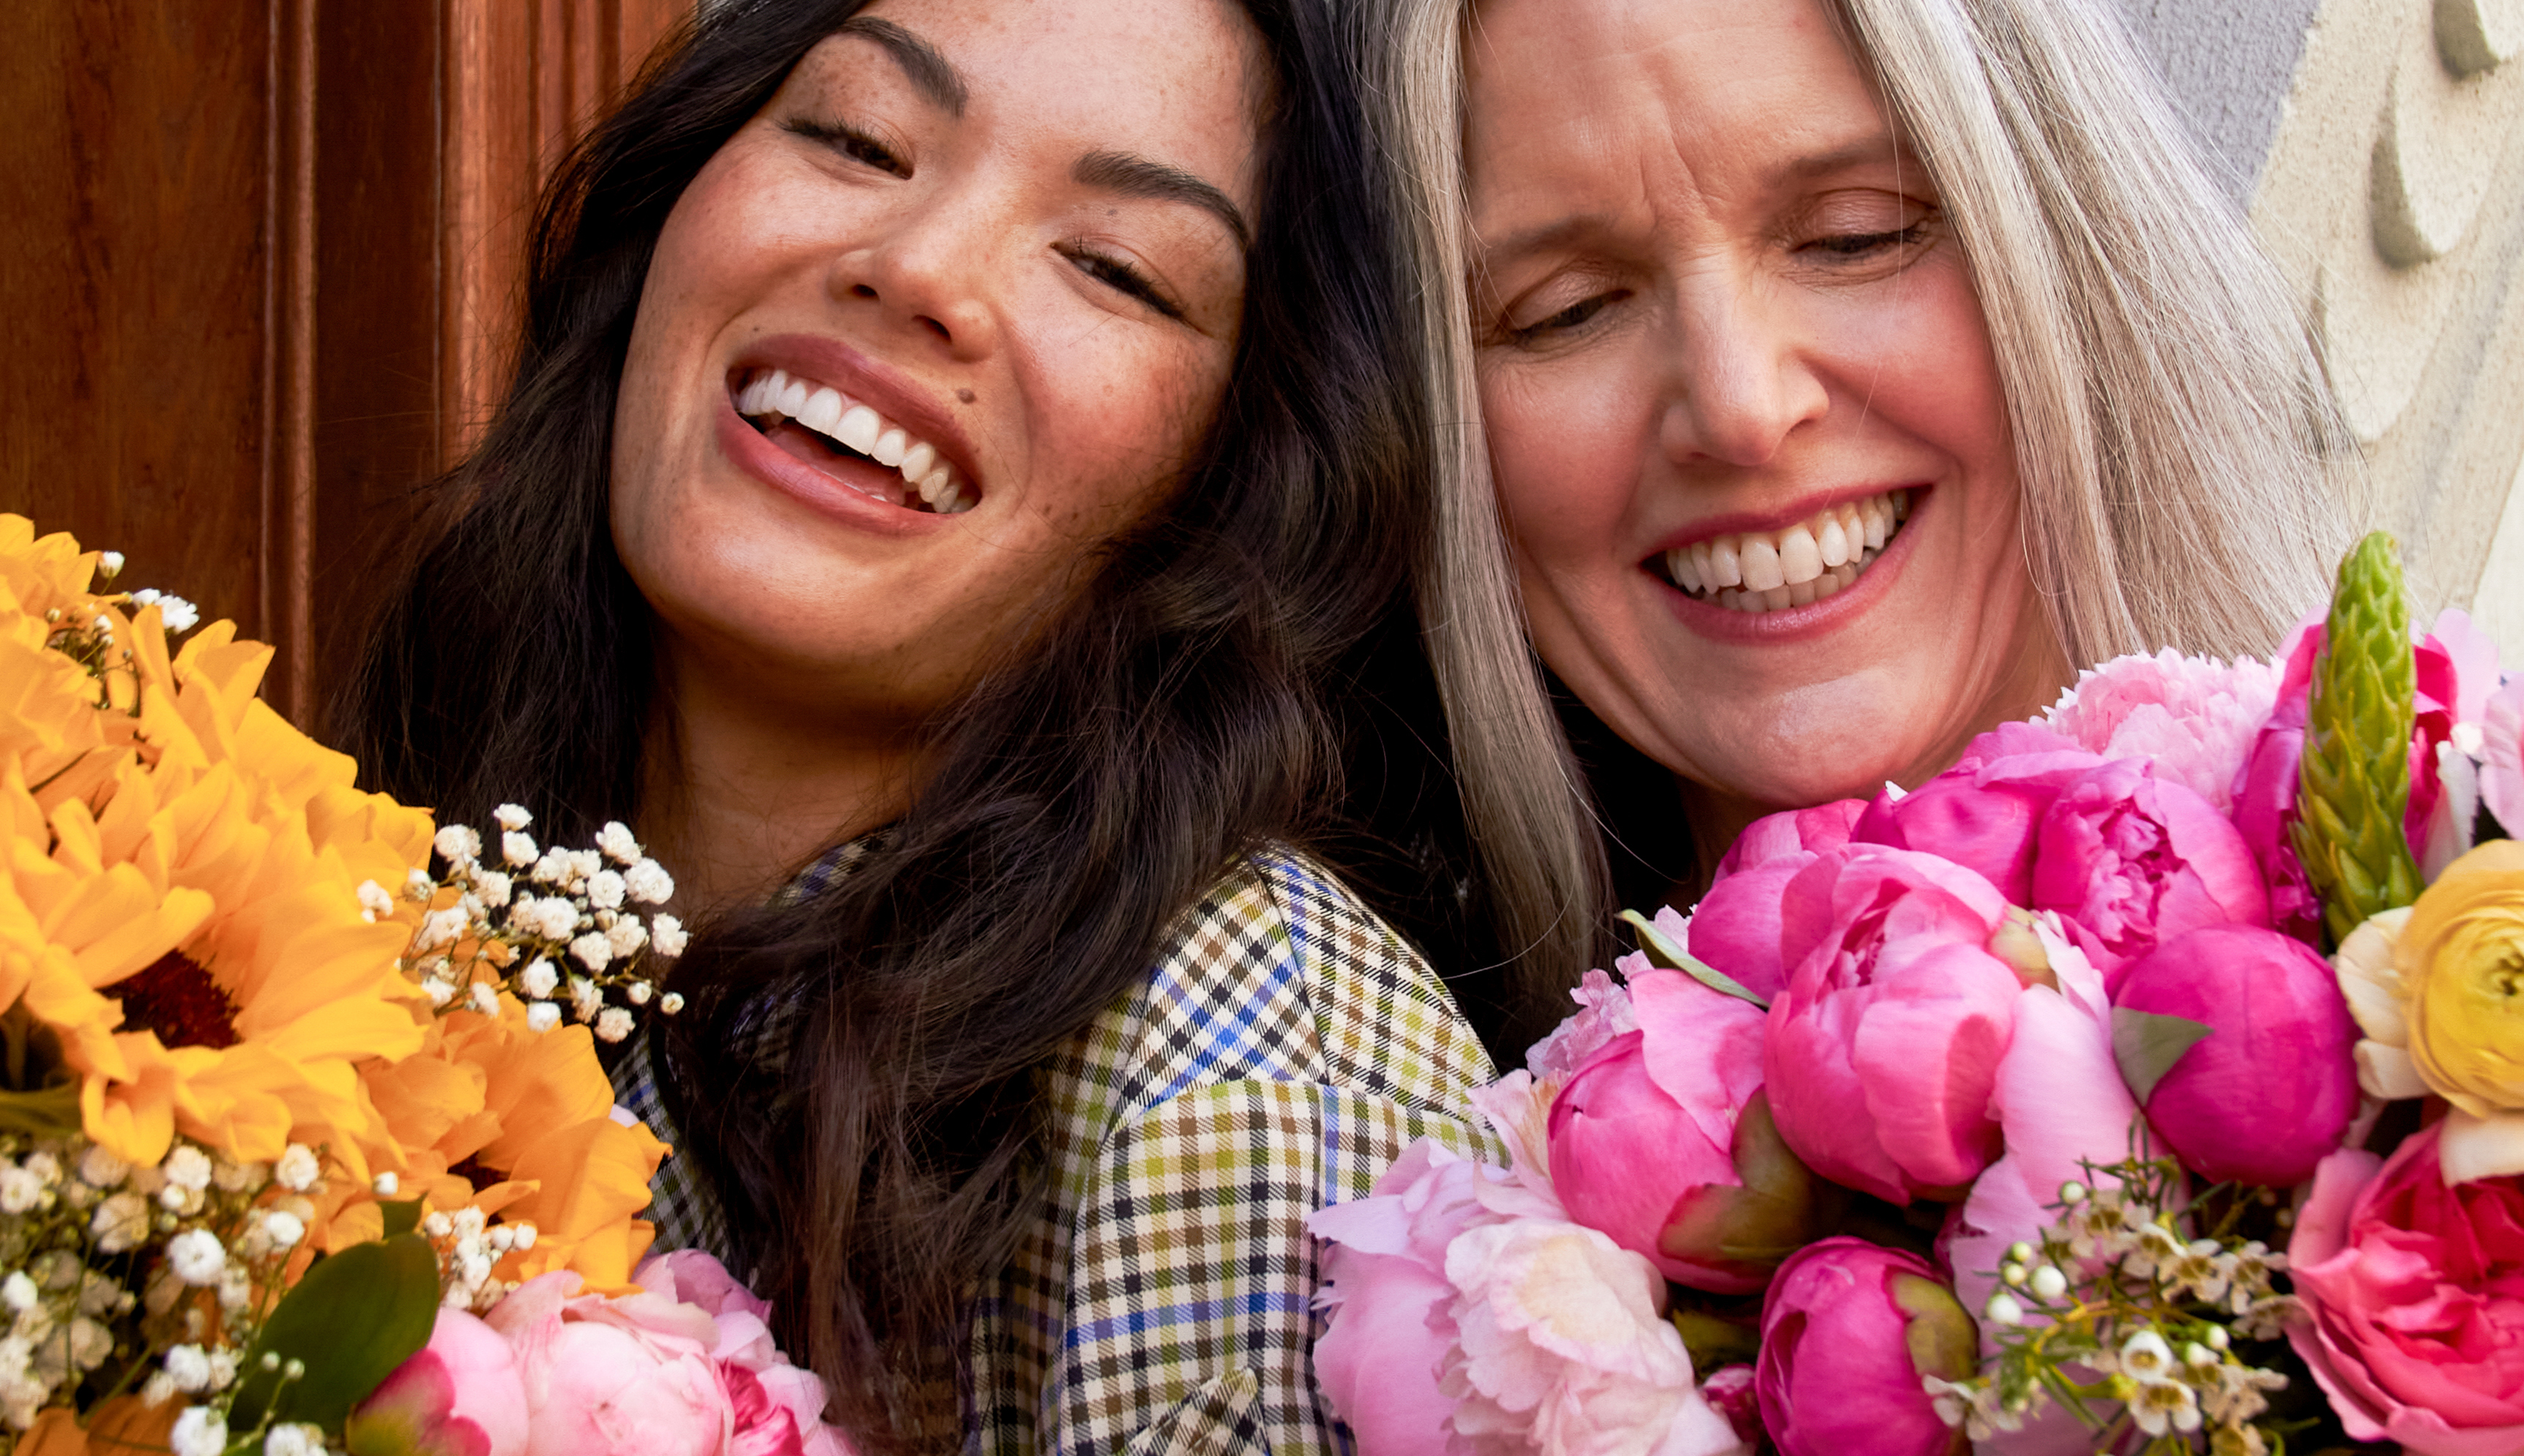 Woman and her Mom enjoying Mother's Day flowers 